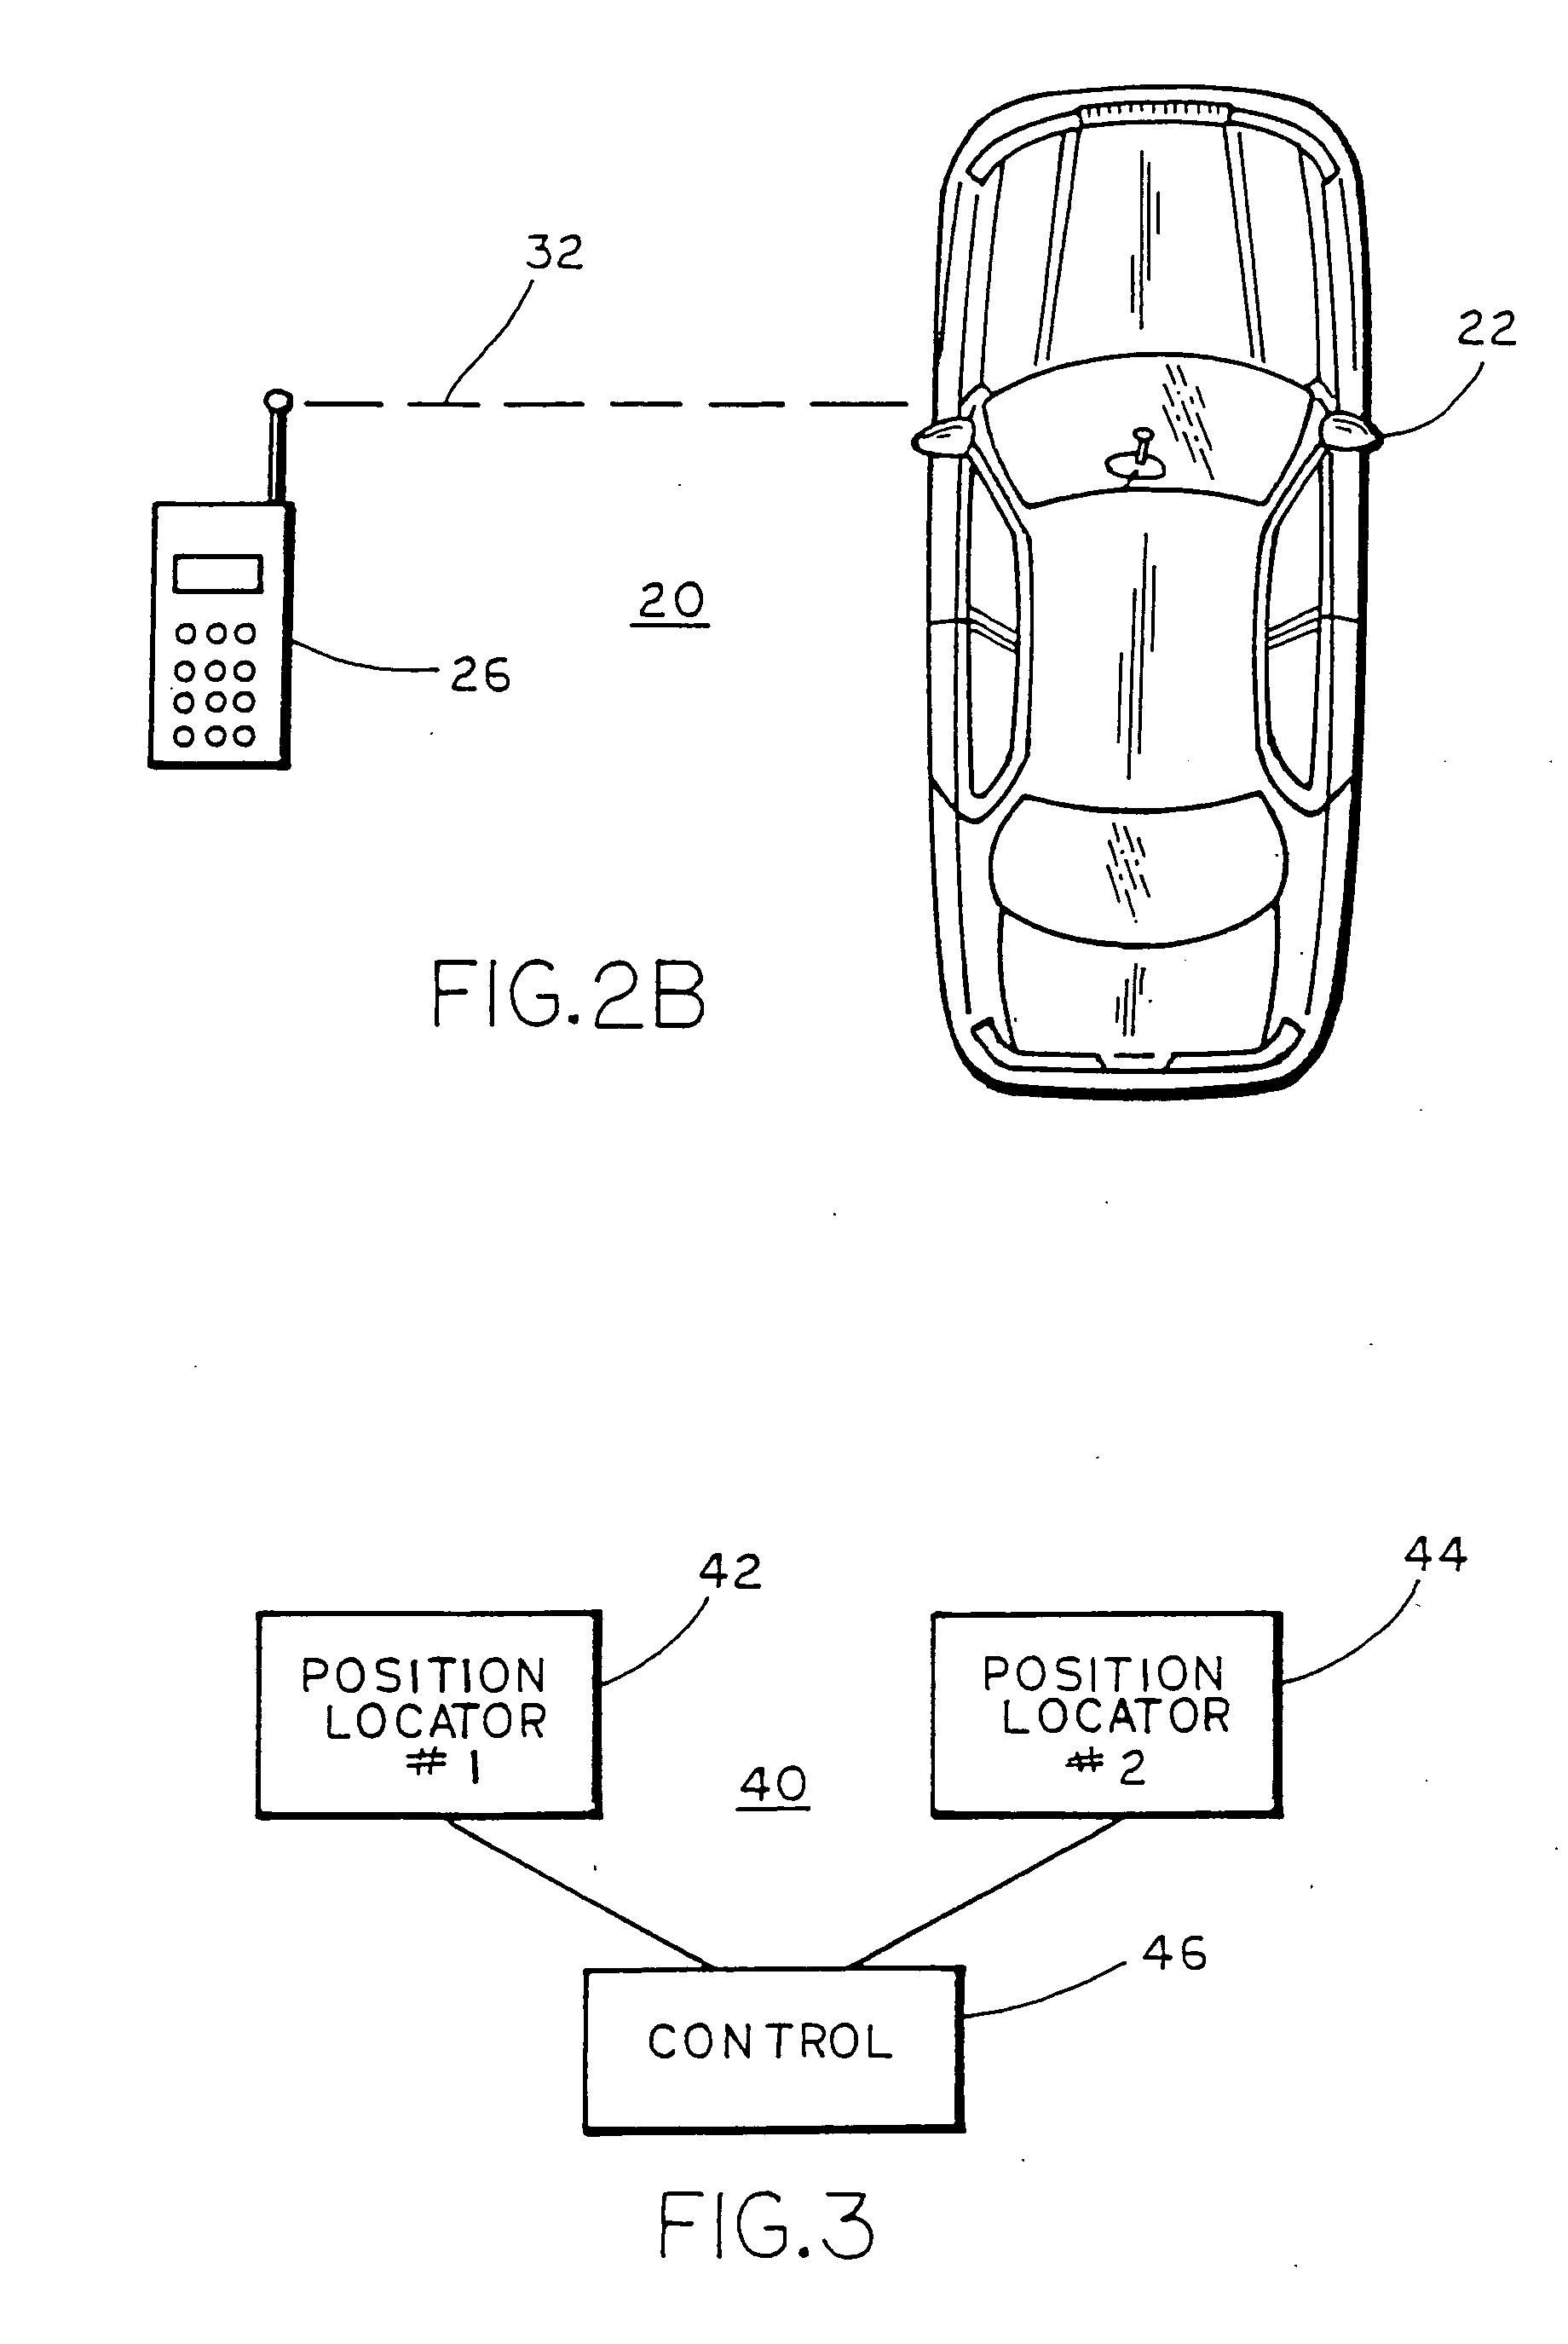 Navigation system for a vehicle